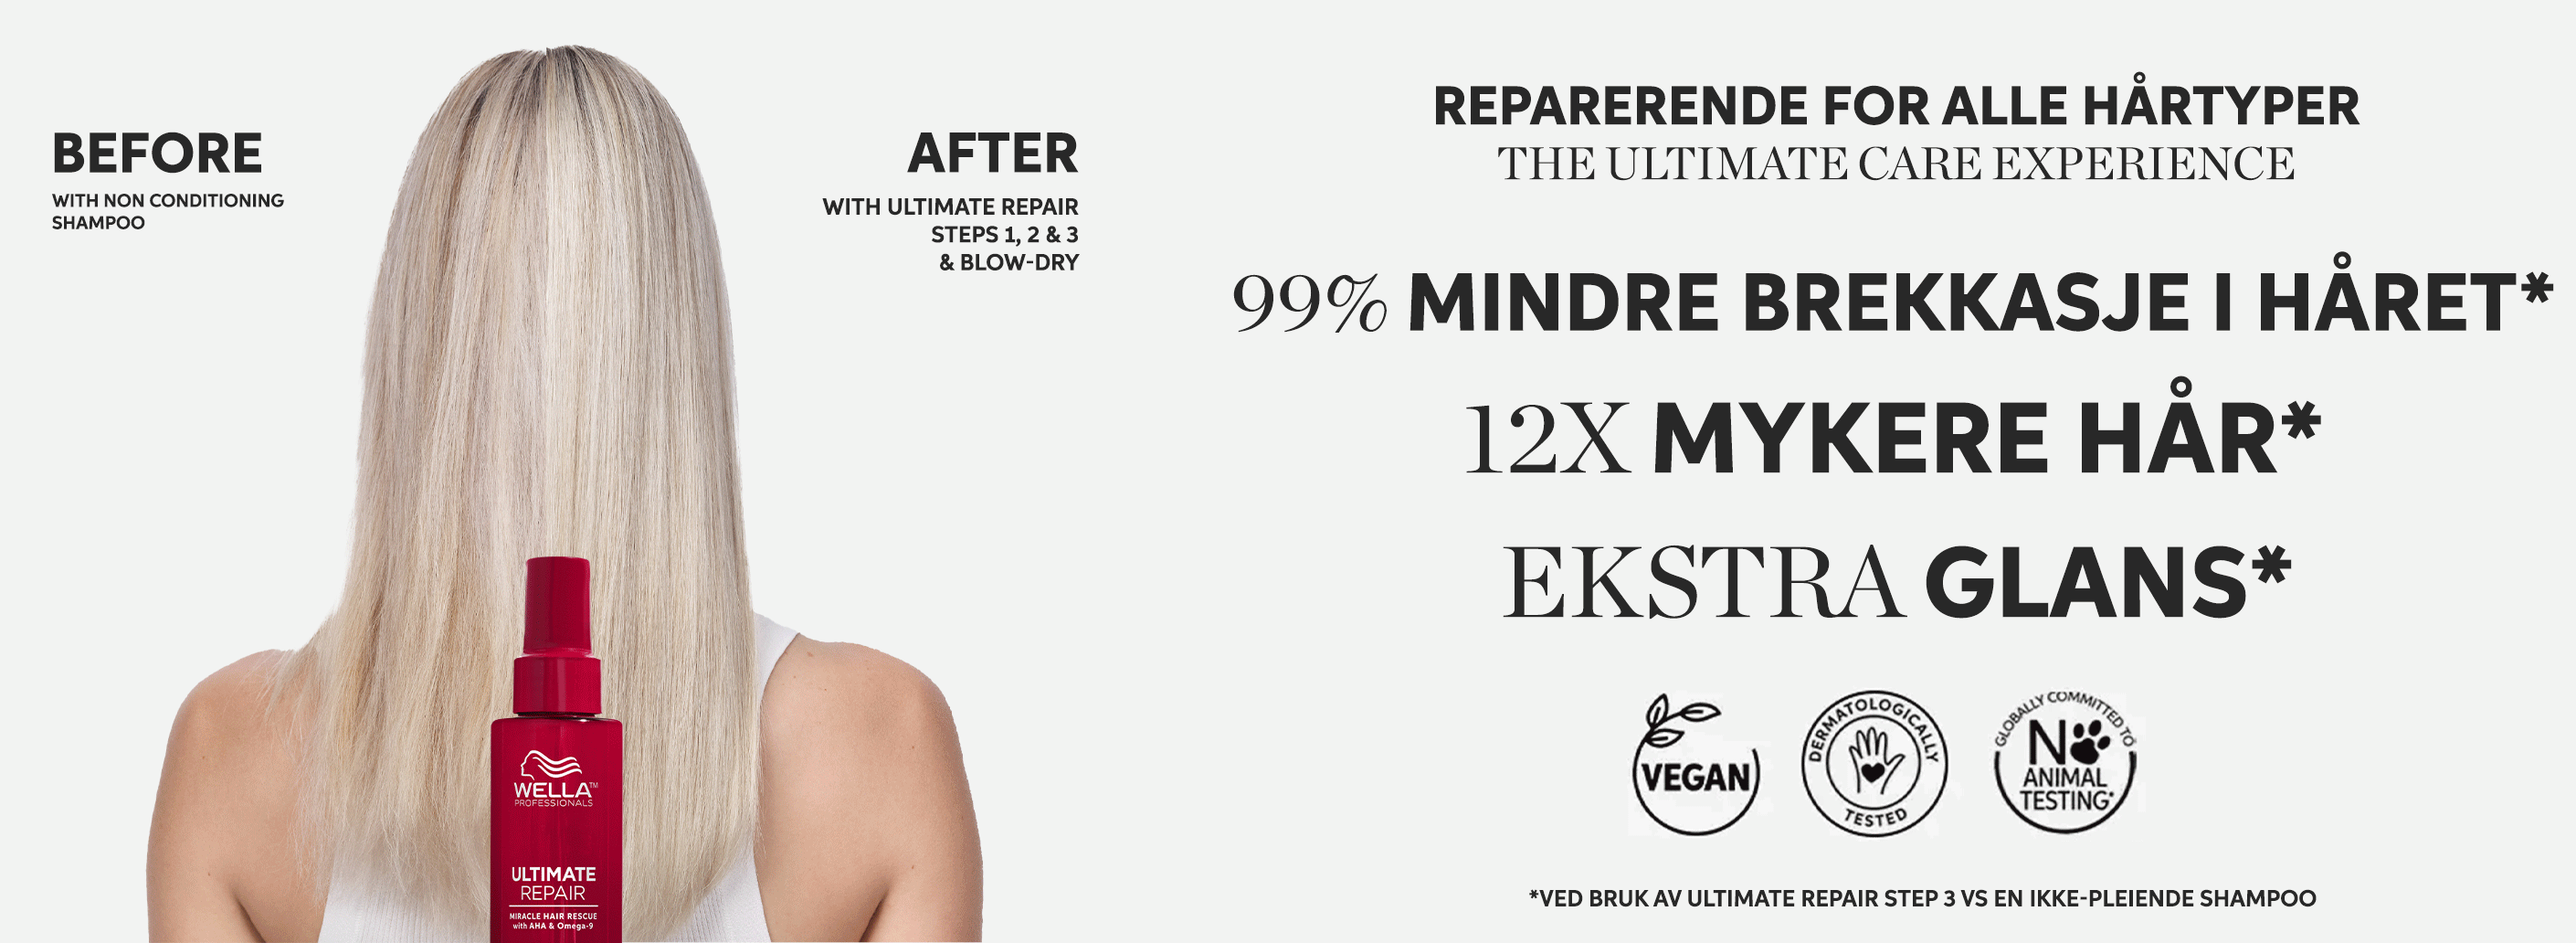 Ultimate Repair is for all types of hair!